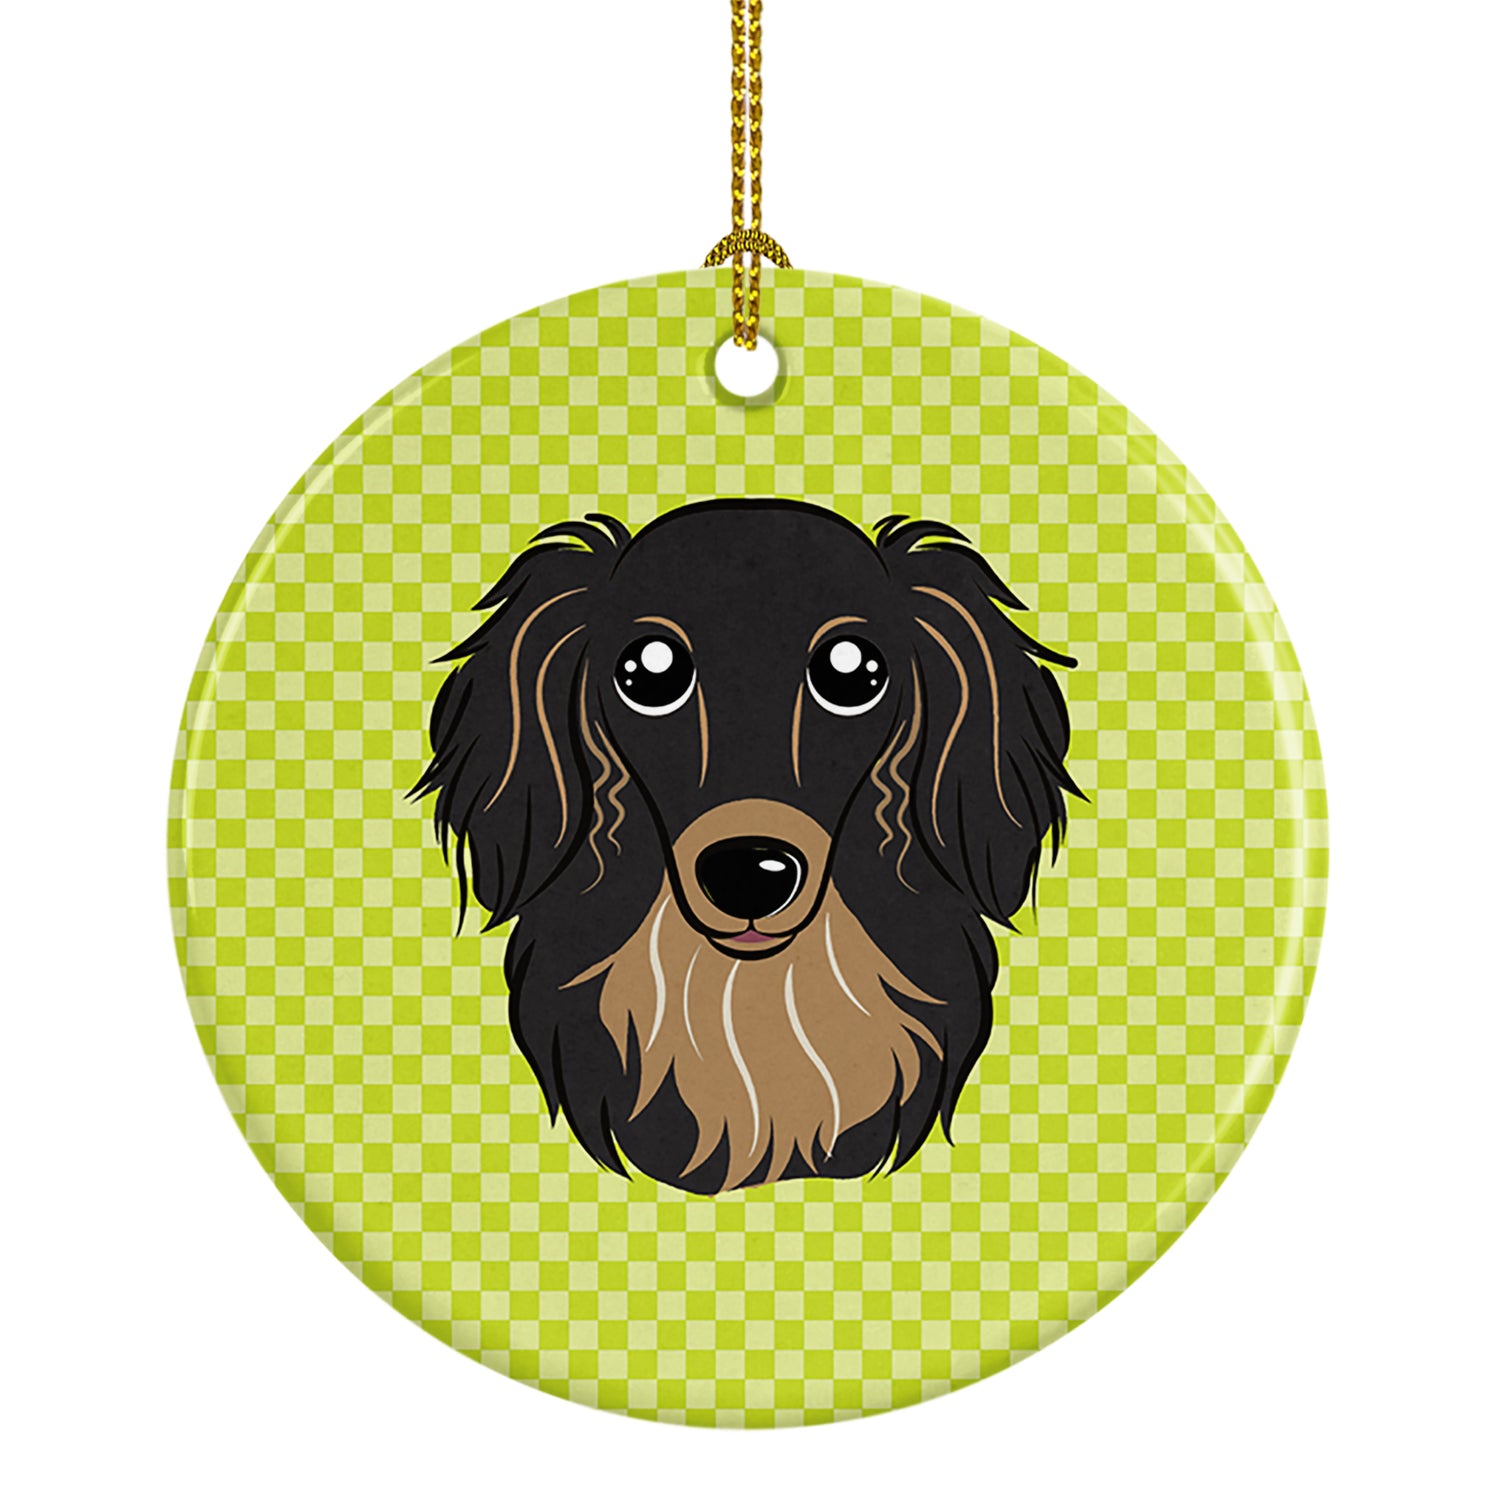 Checkerboard Lime Green Longhair Black and Tan Dachshund Ceramic Ornament BB1275CO1 - the-store.com